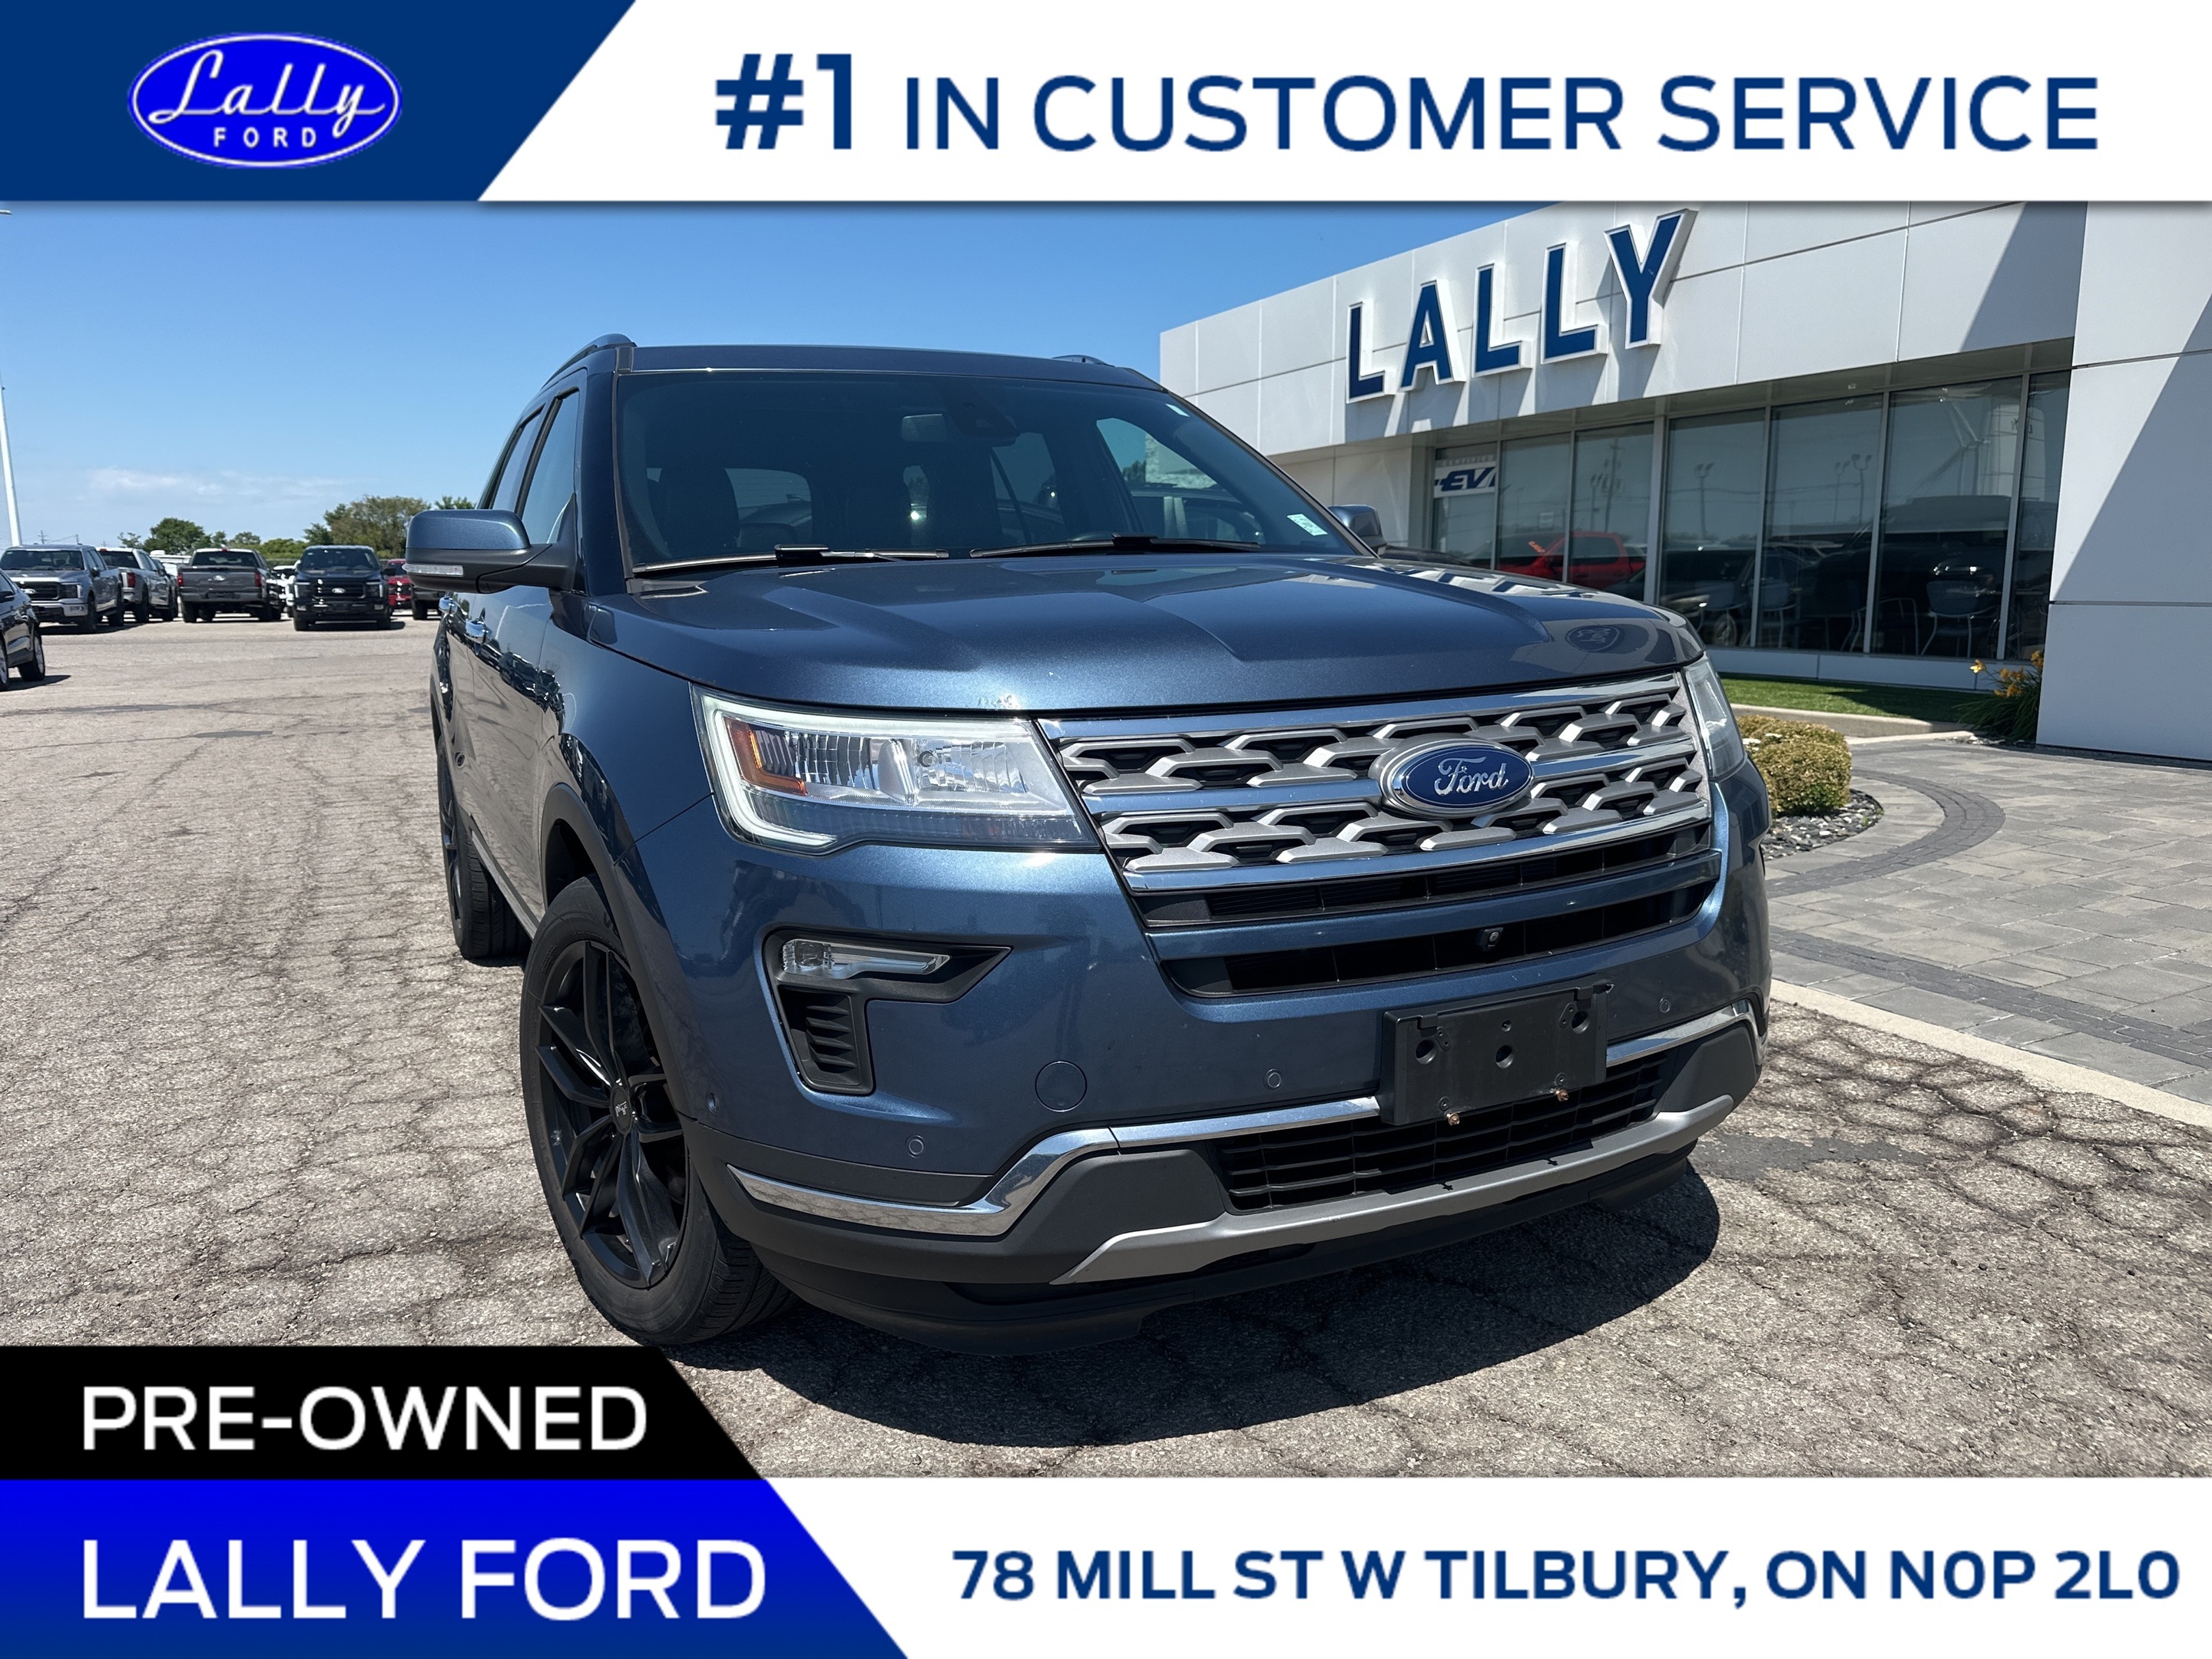 2019 Ford Explorer Limited, 4WD, Roof, Nav, Leather!